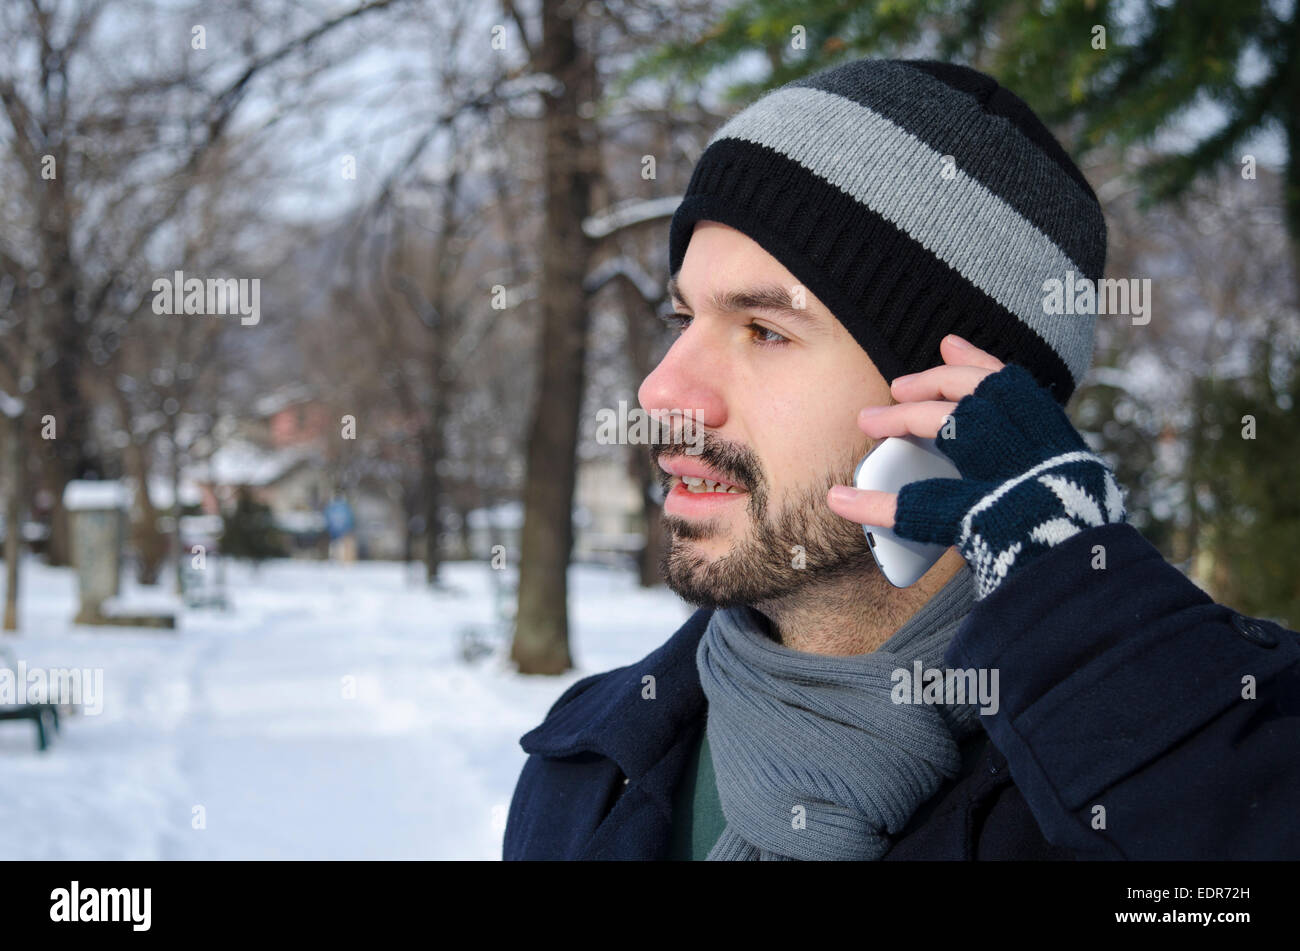 Bearded man talking on a cell phone in winter Stock Photo